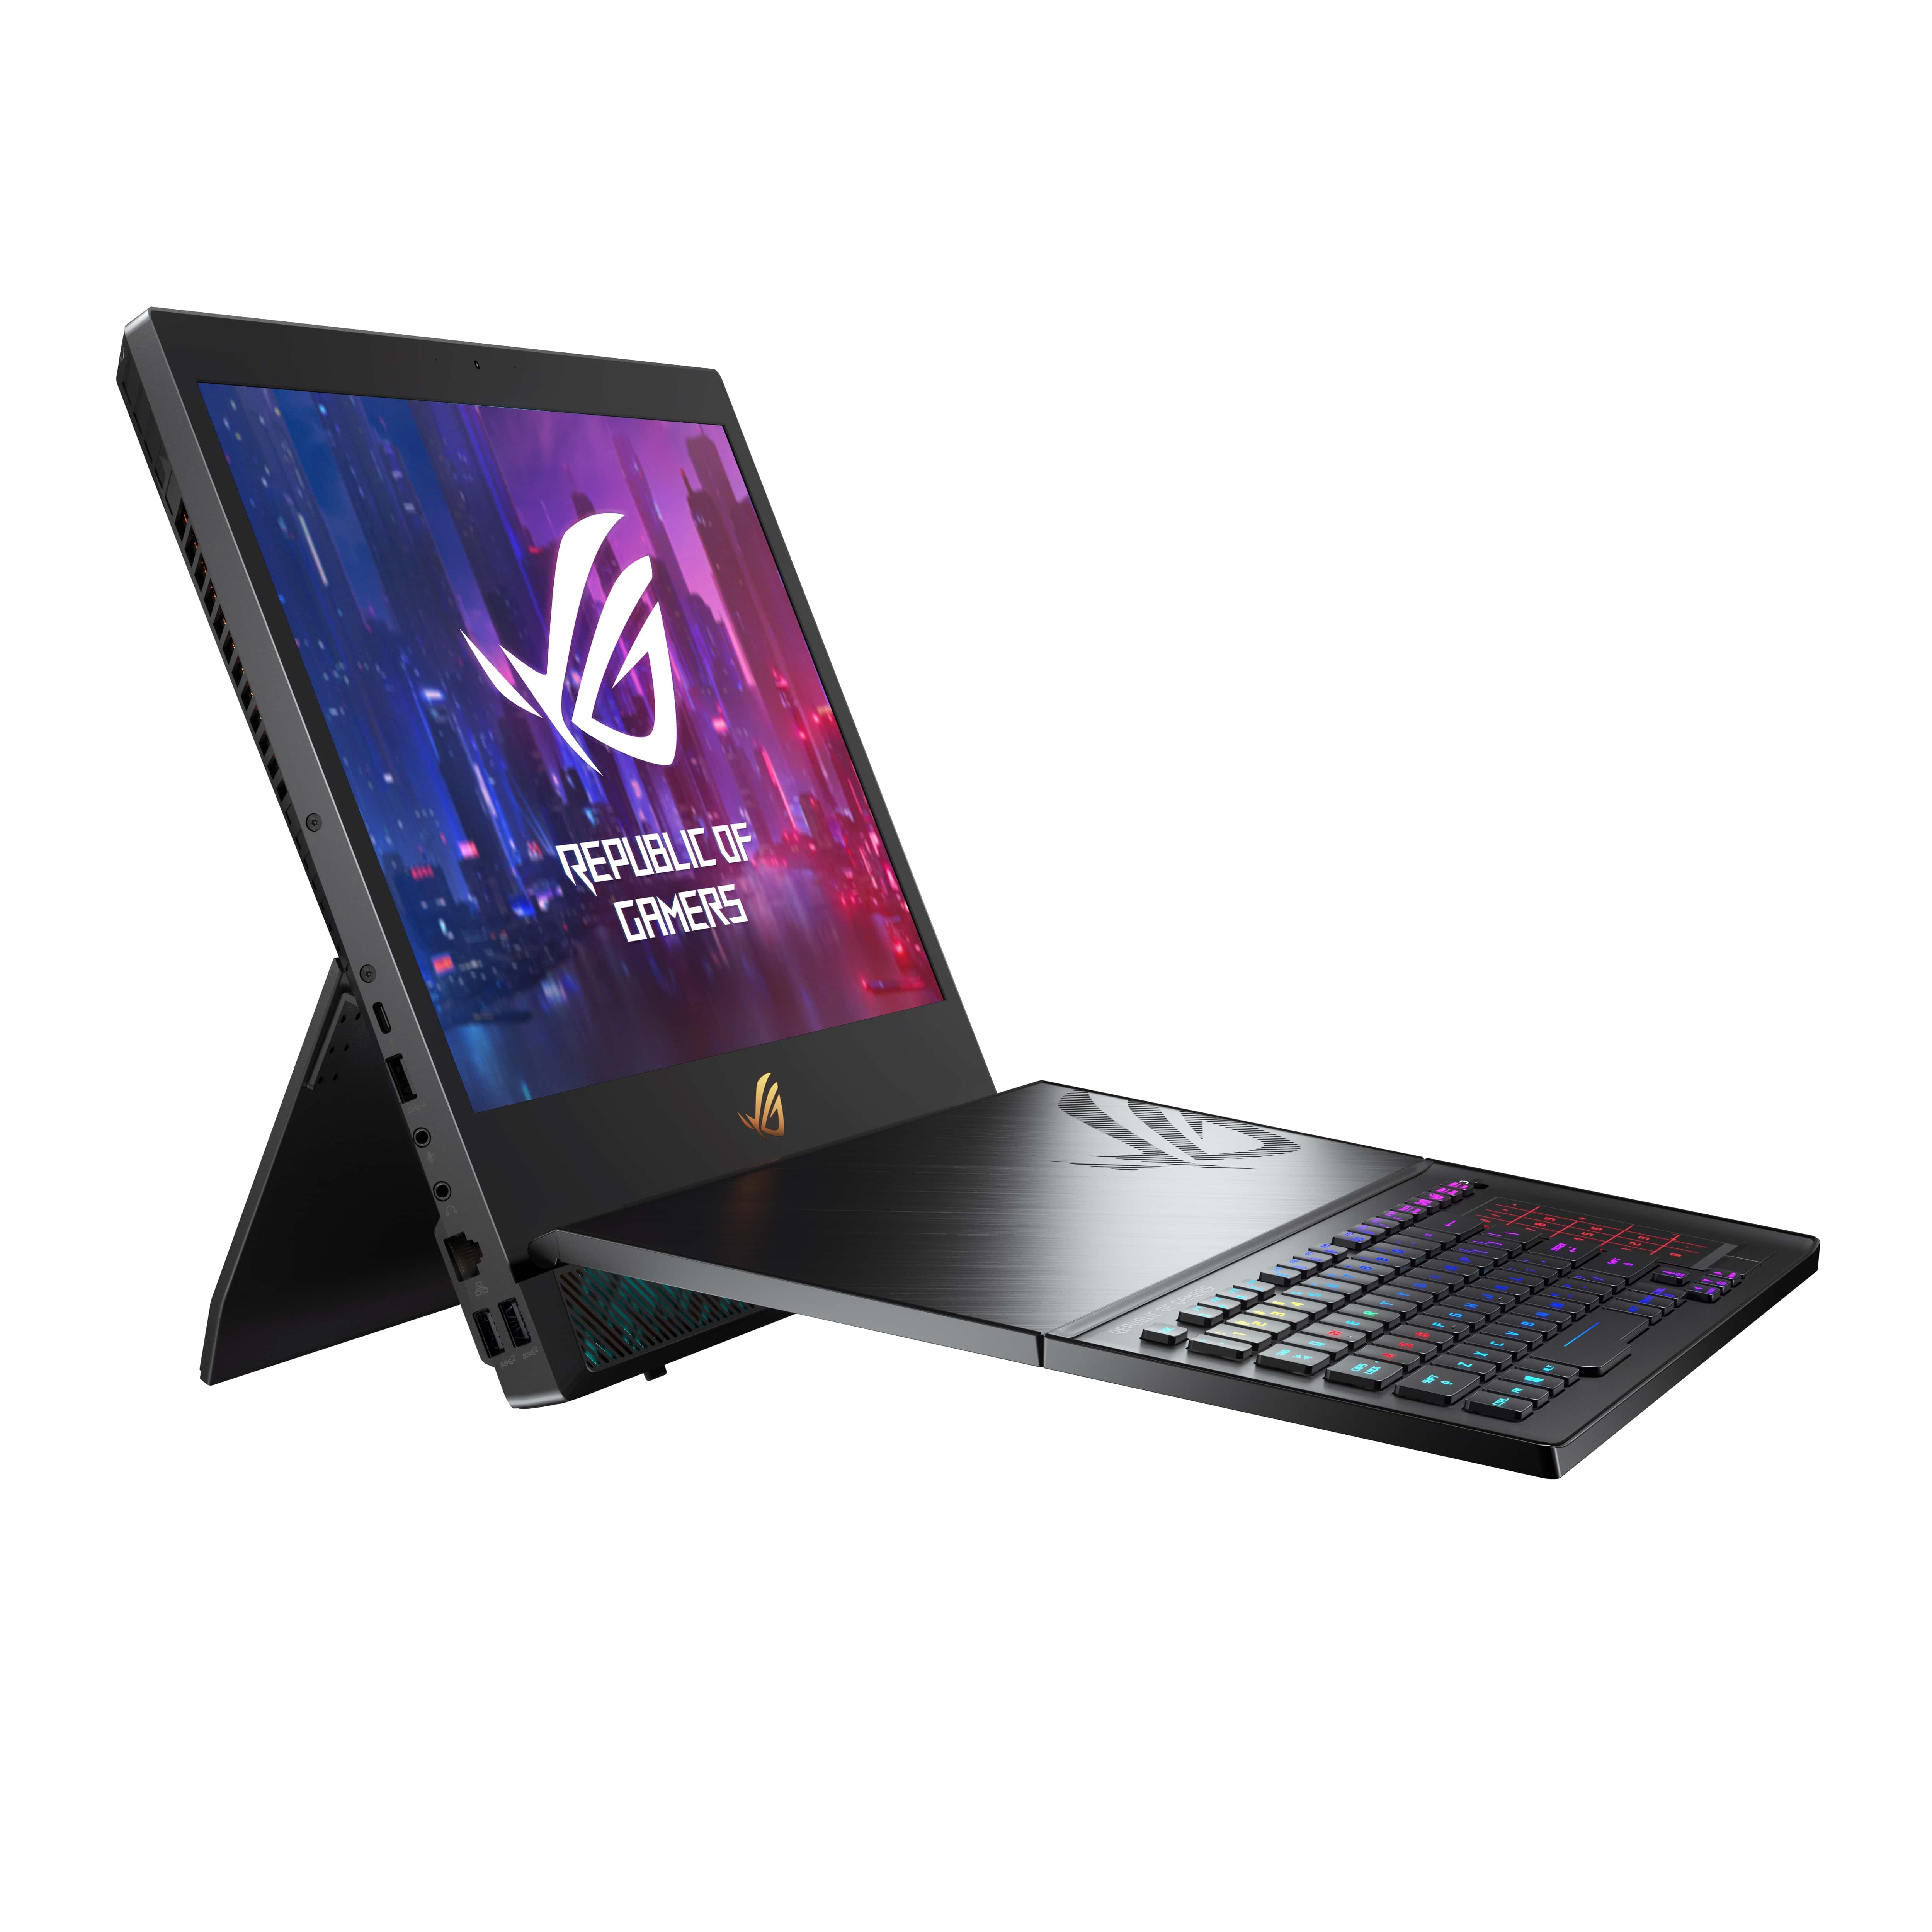 asus announces mothership 2 in 1 gaming machine ces 2019 copy of rog gz700 product photo 01